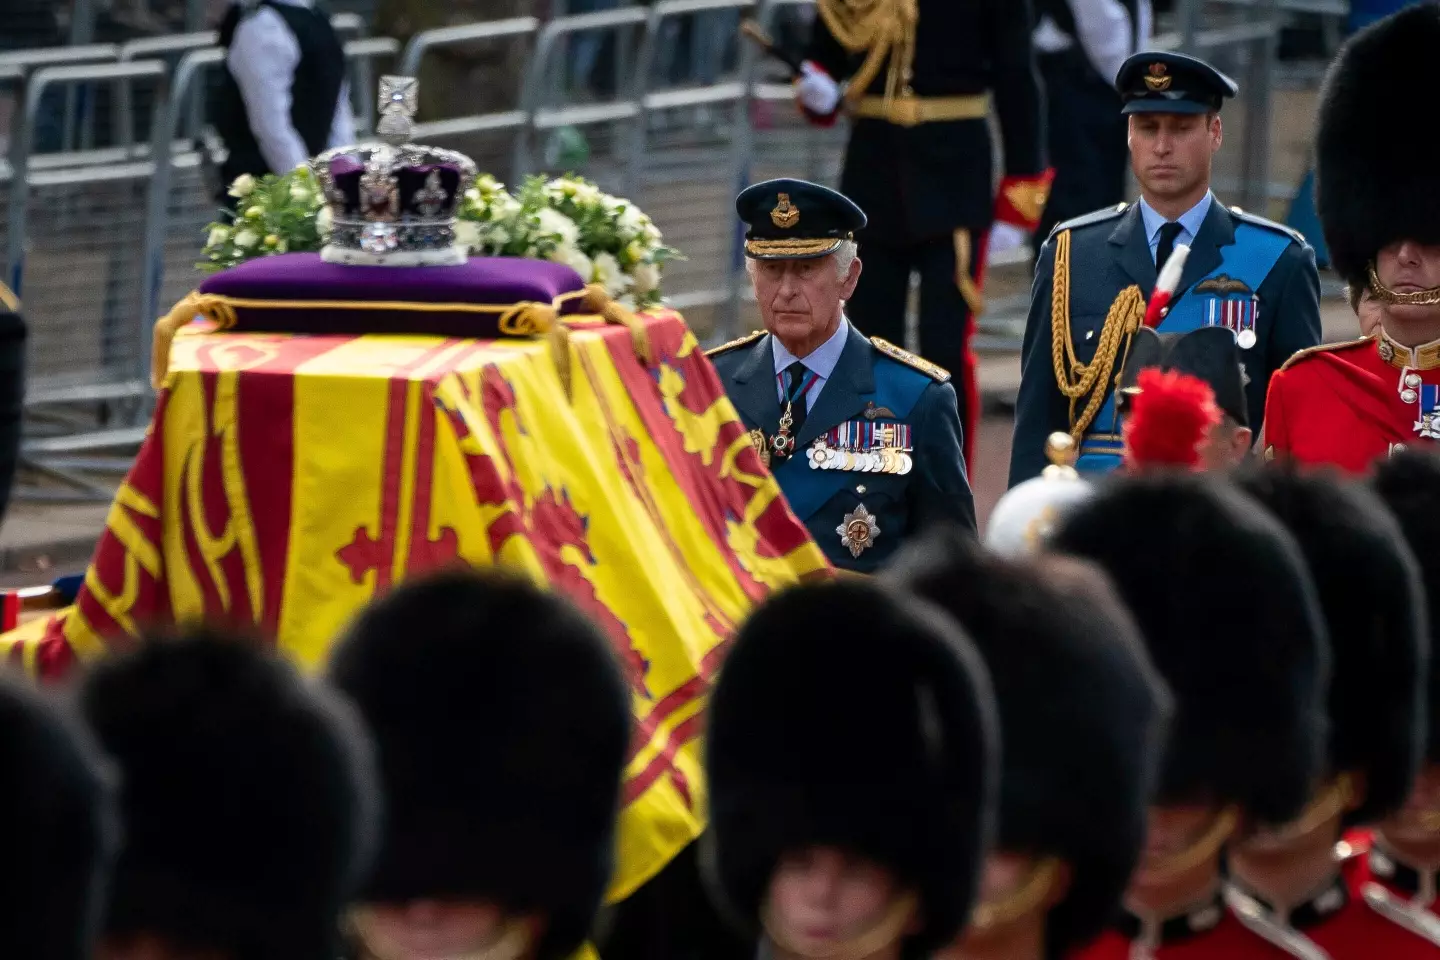 The Queen's wreath was laid on top of her coffin as she made her way to Westminster Hall.